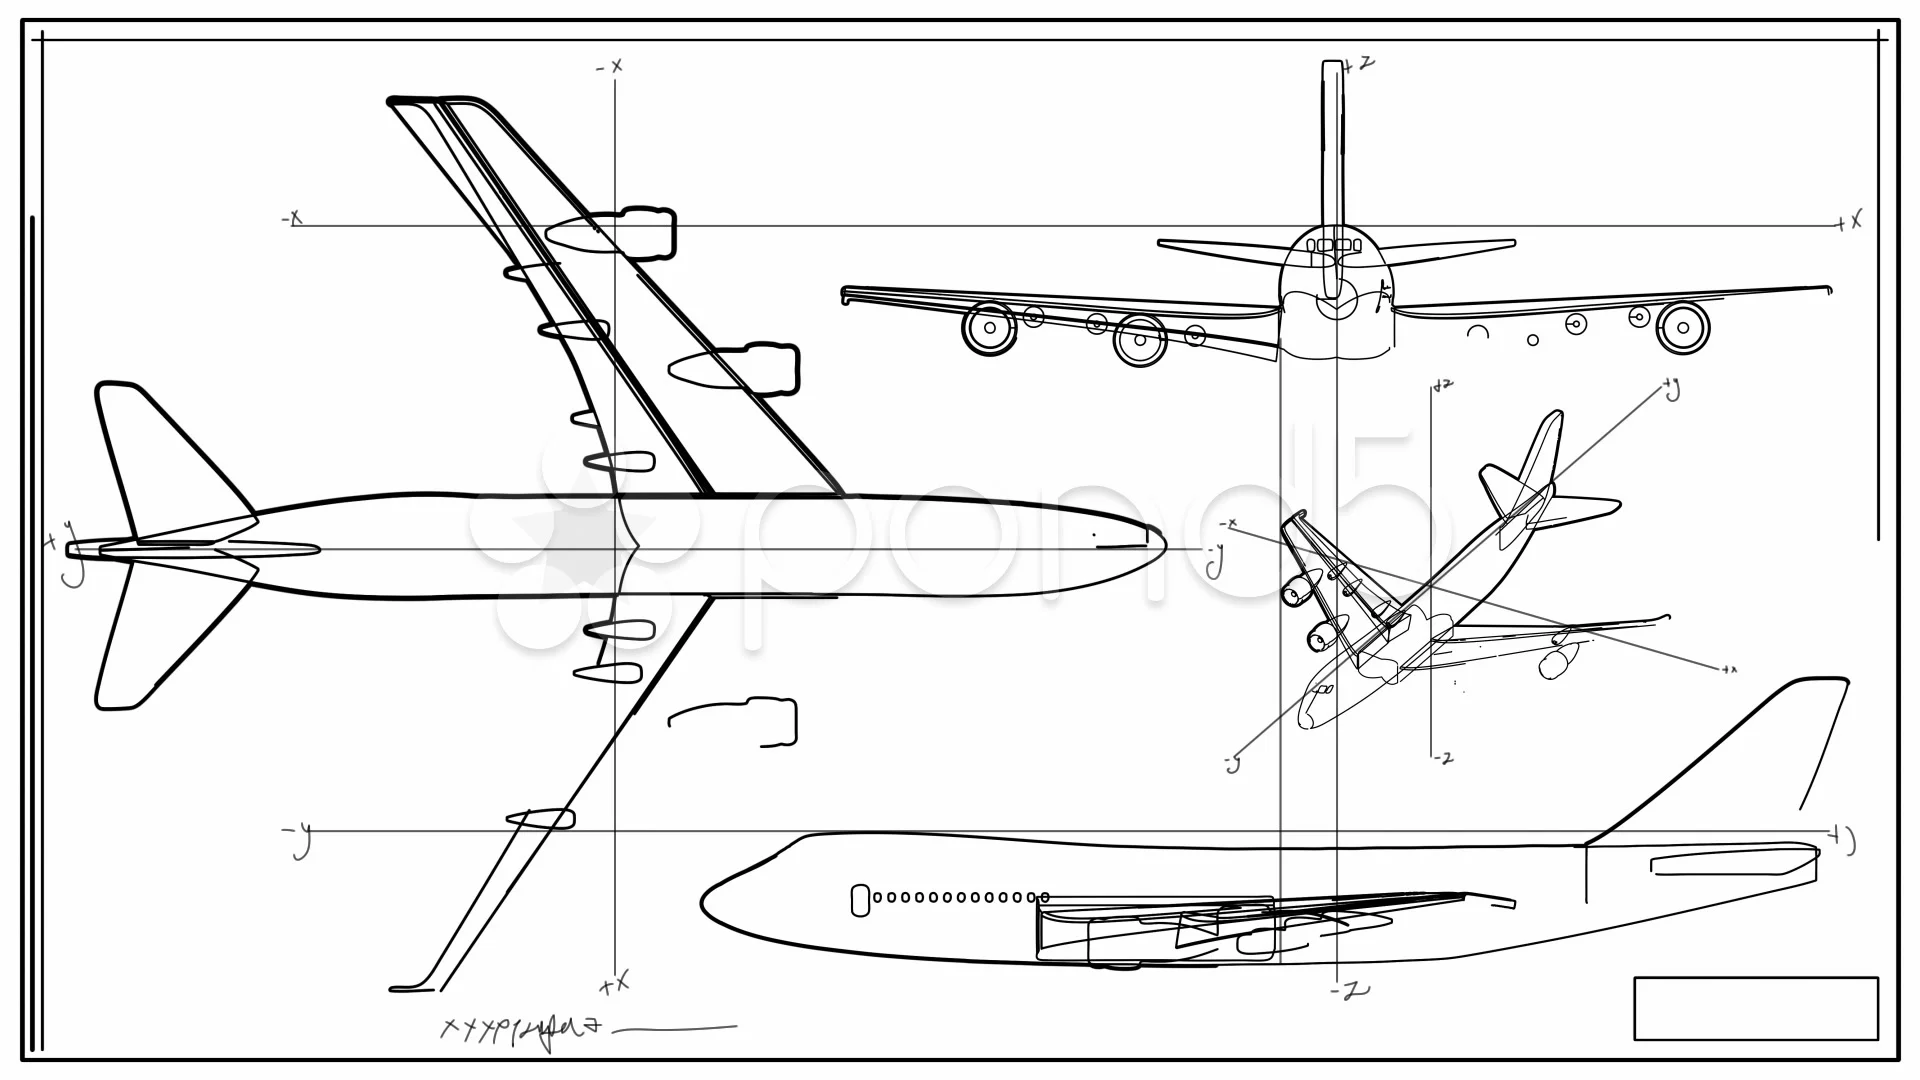 aircraft technical drawings free download - coolArtDrawingsSketchesPens